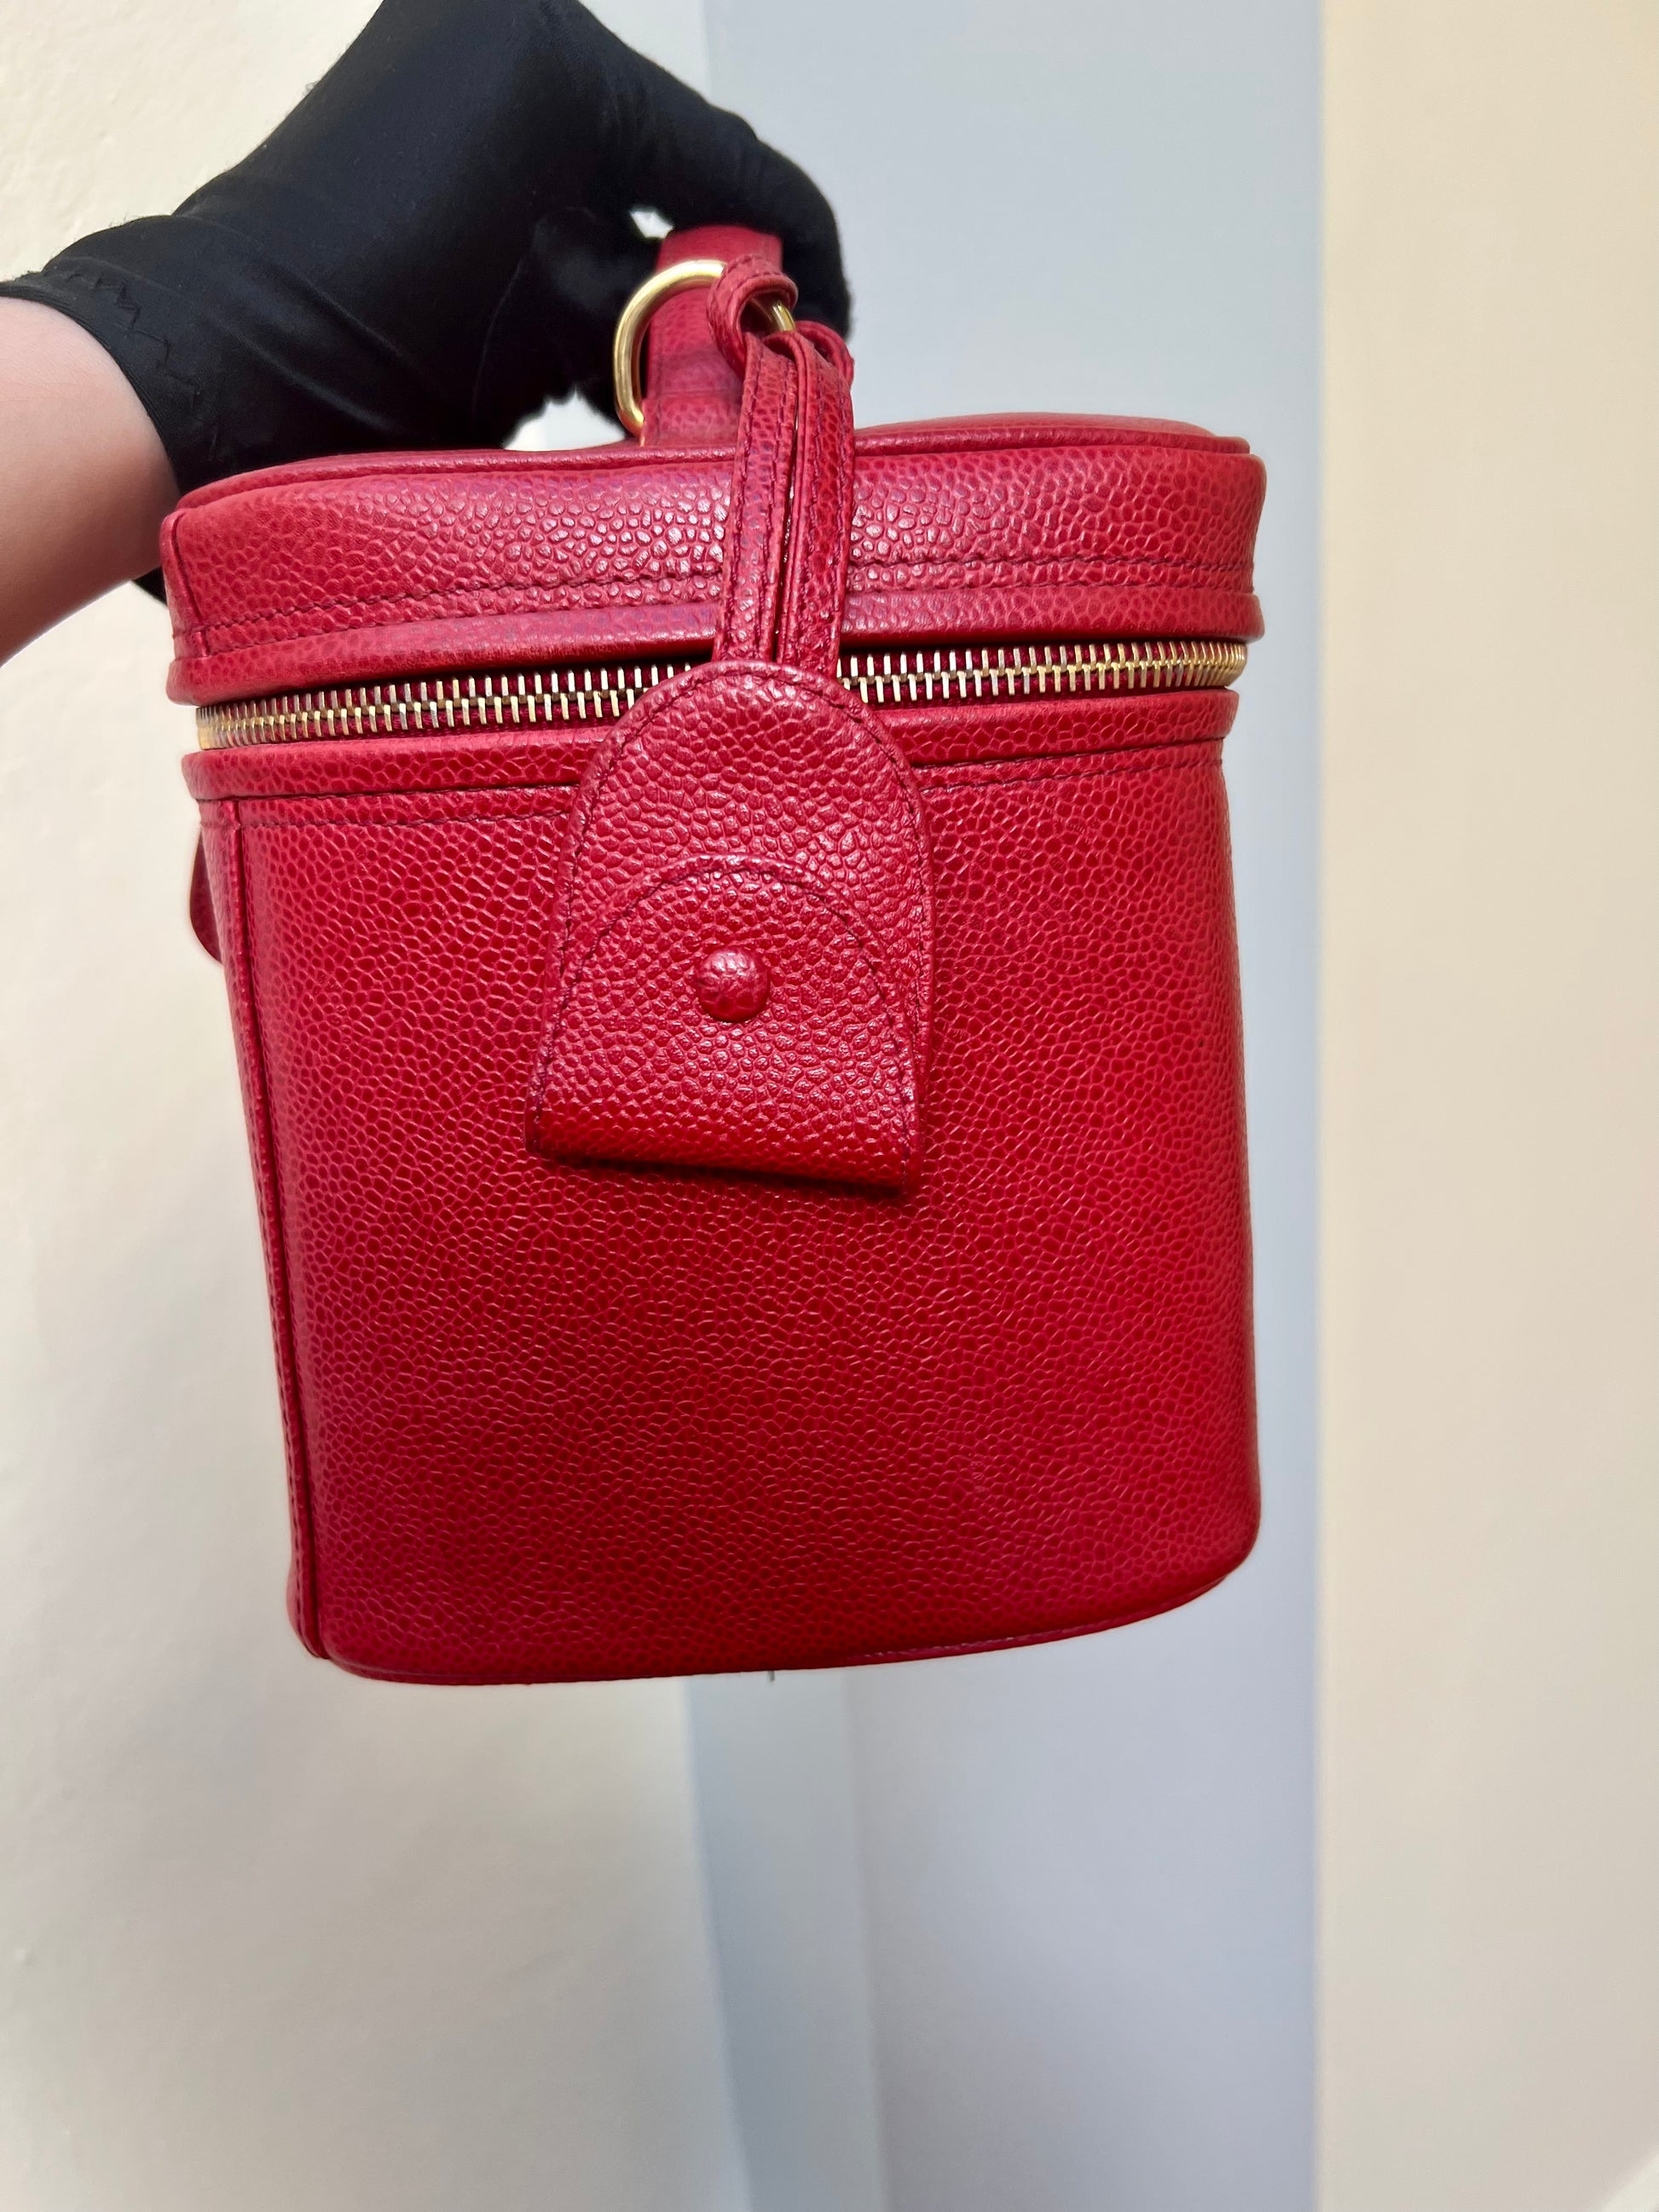 Vanity leather handbag Chanel Red in Leather - 24606260